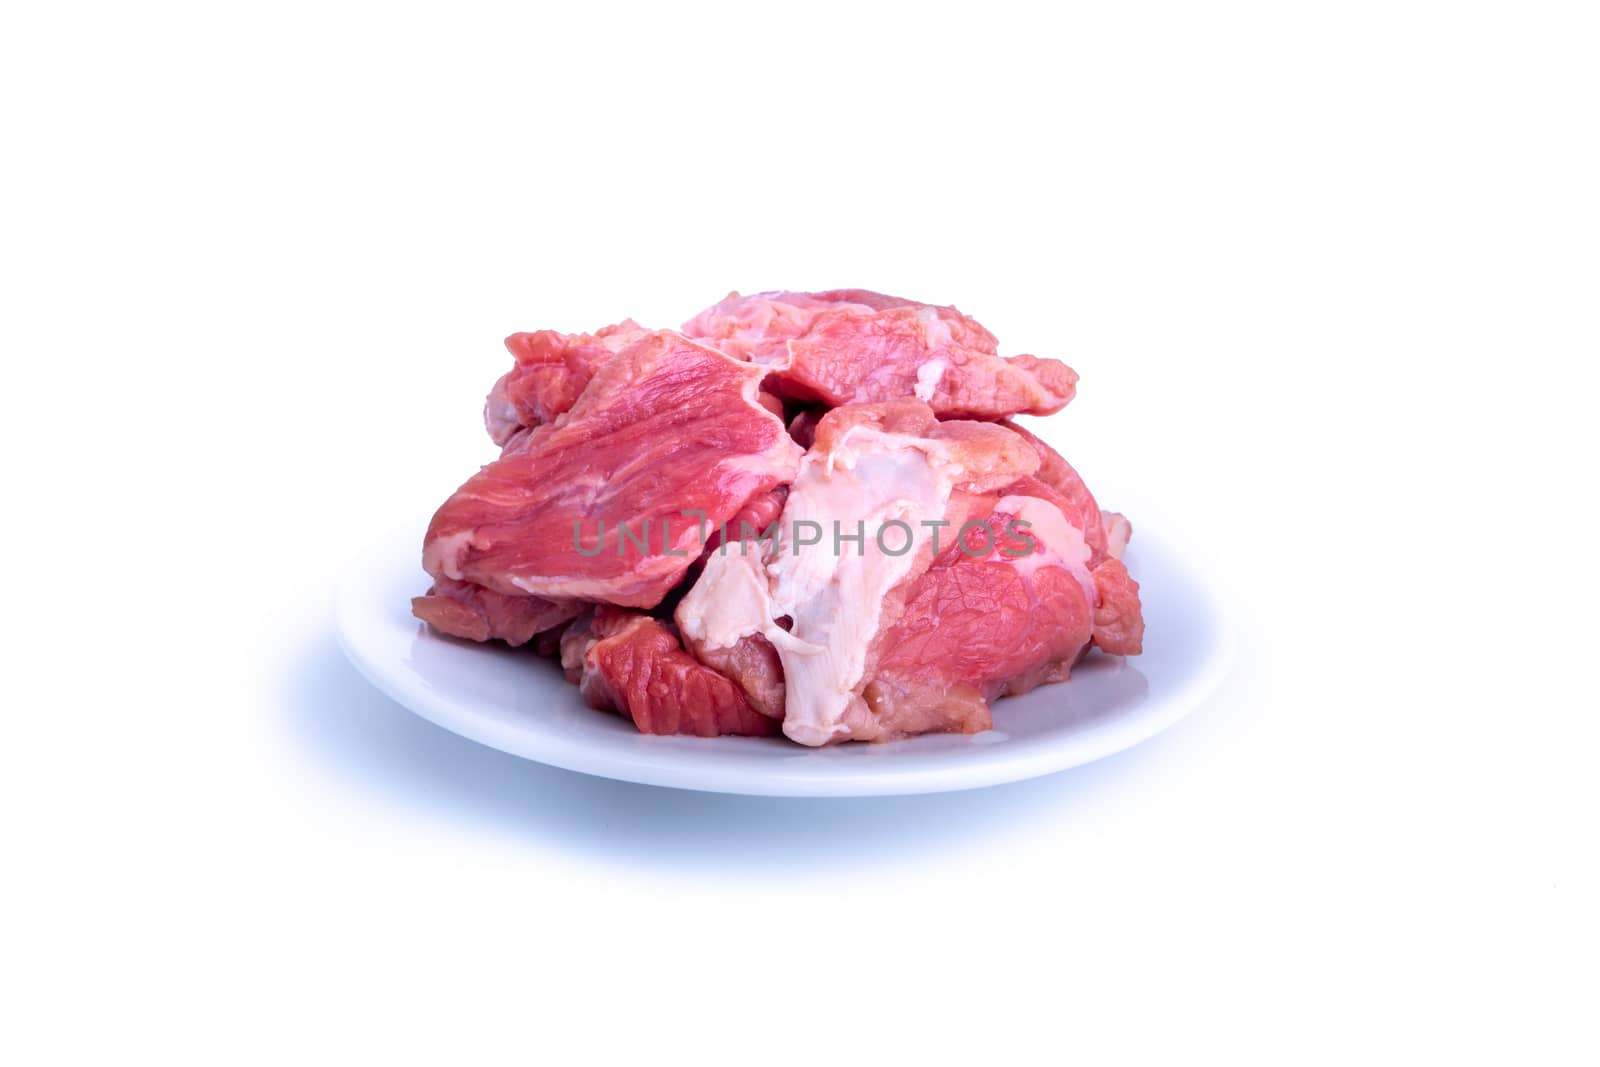 Fresh raw beef steak isolated on white background with selective focus